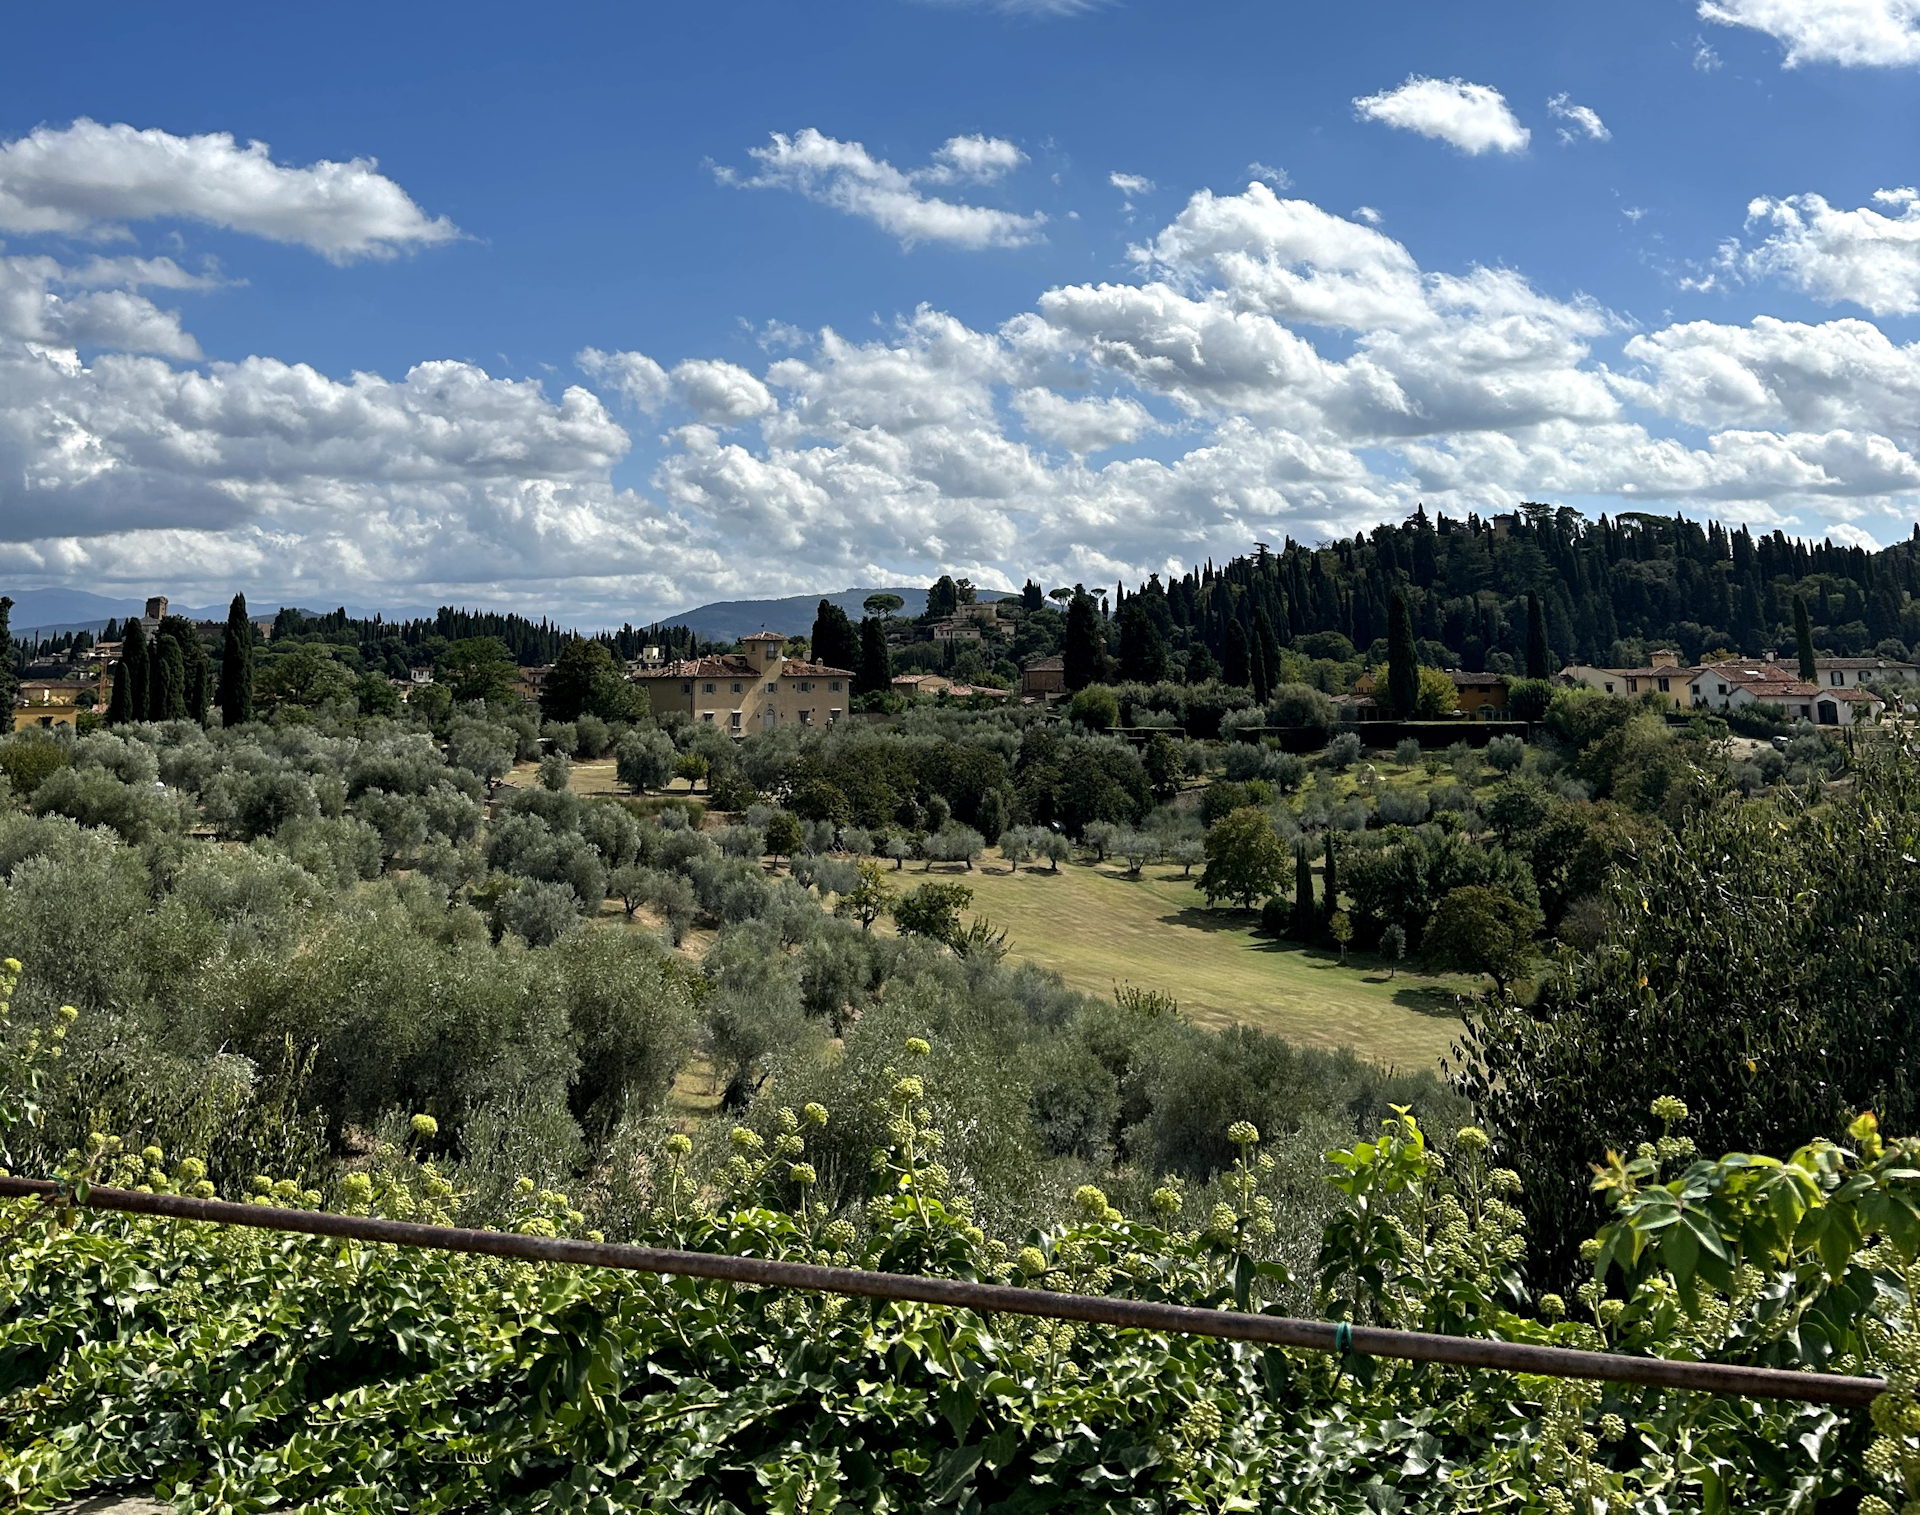 The rolling Tuscan Hills and trees of the Boboli Gardens in Florence on a bright, blue-sky day